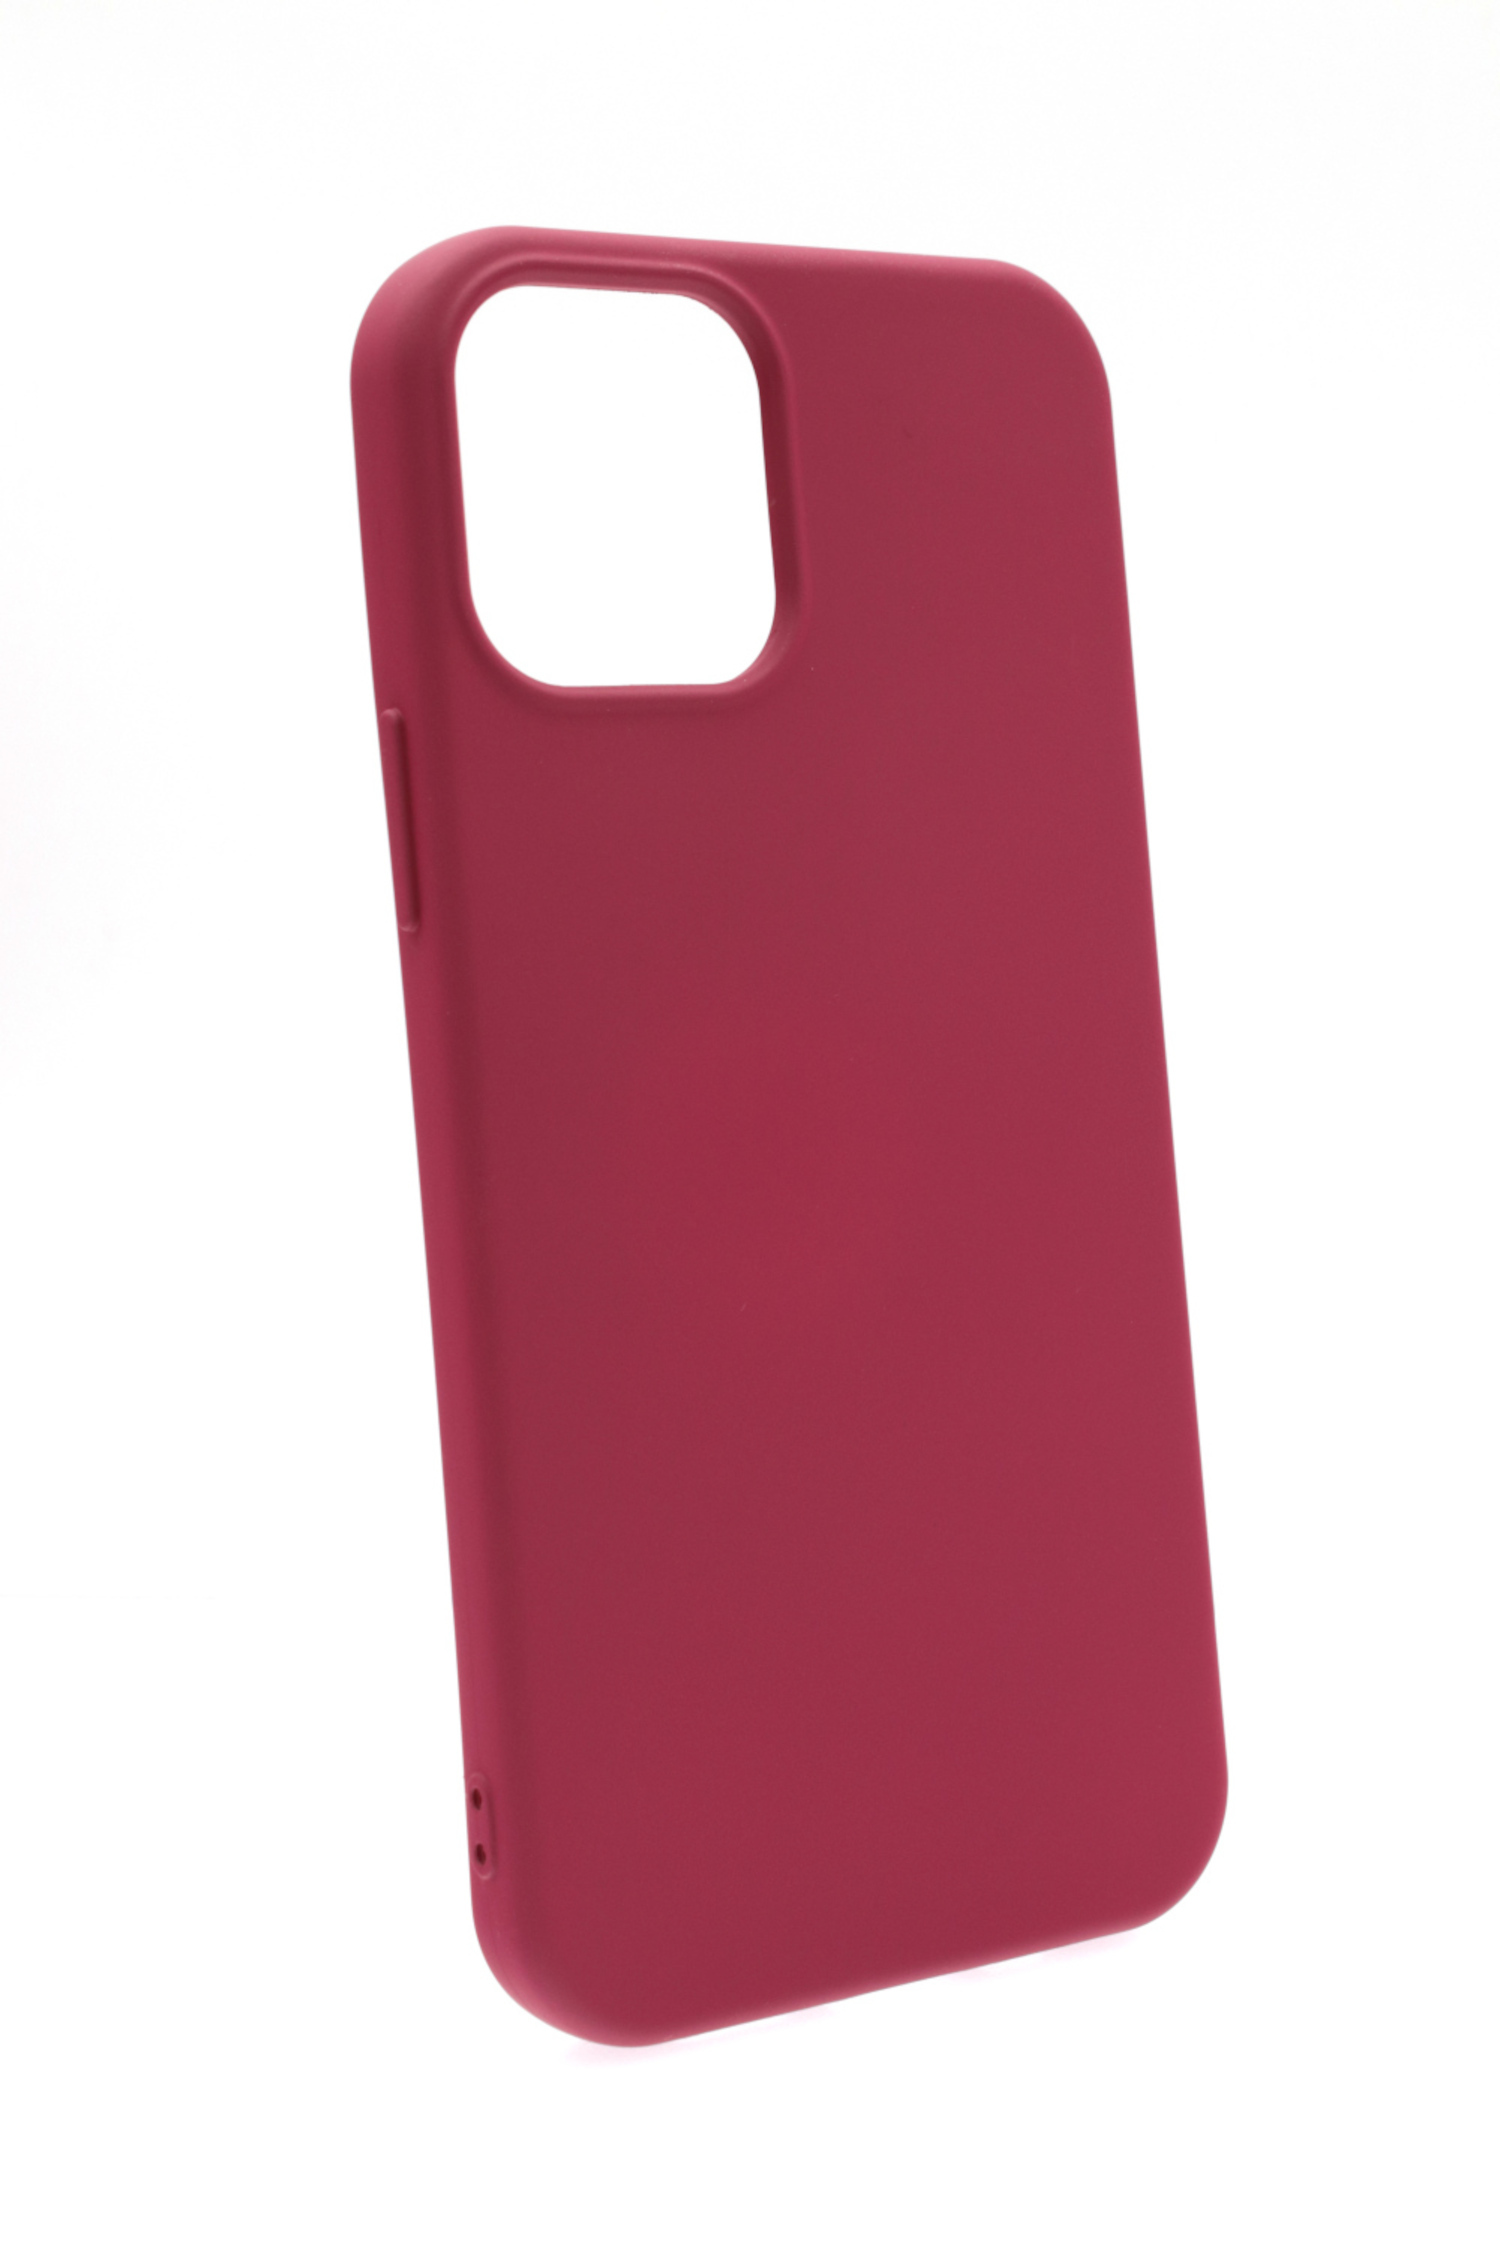 JAMCOVER Silikon Case, Backcover, Apple, iPhone 12, 12 Maroon iPhone Pro